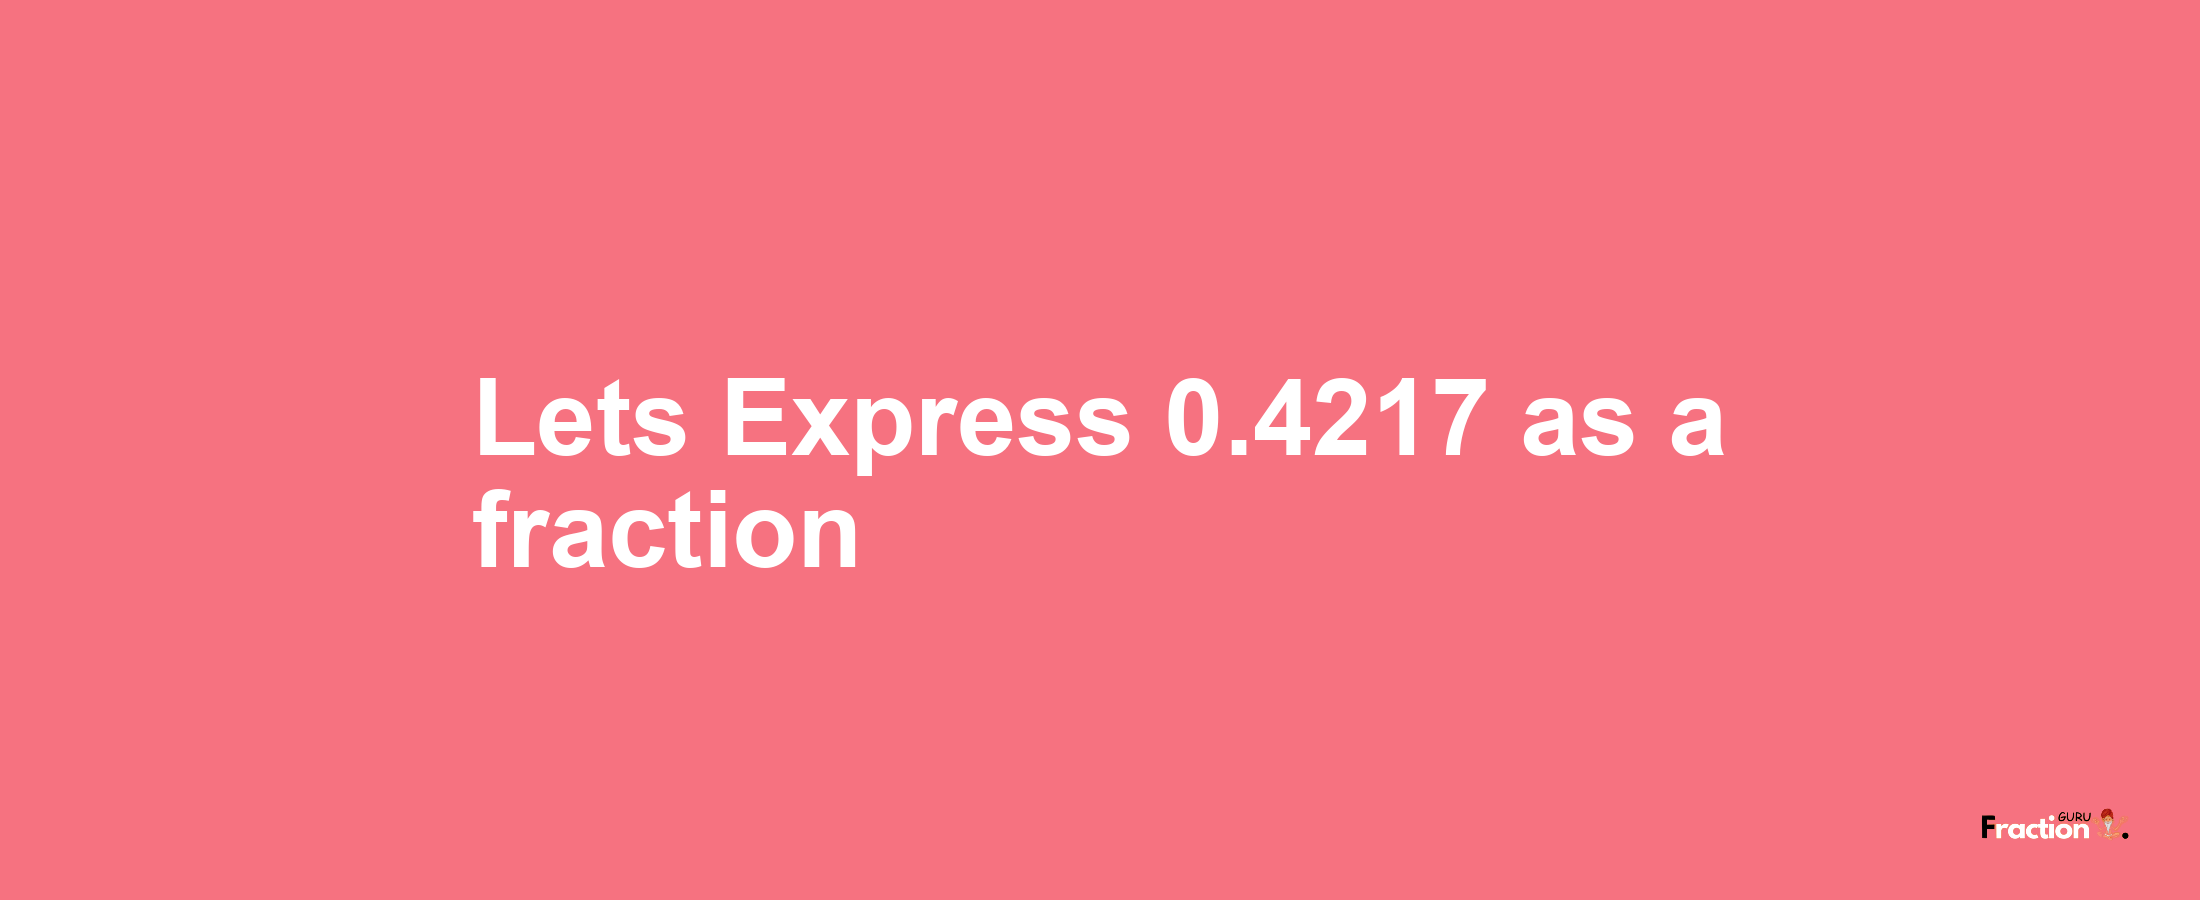 Lets Express 0.4217 as afraction